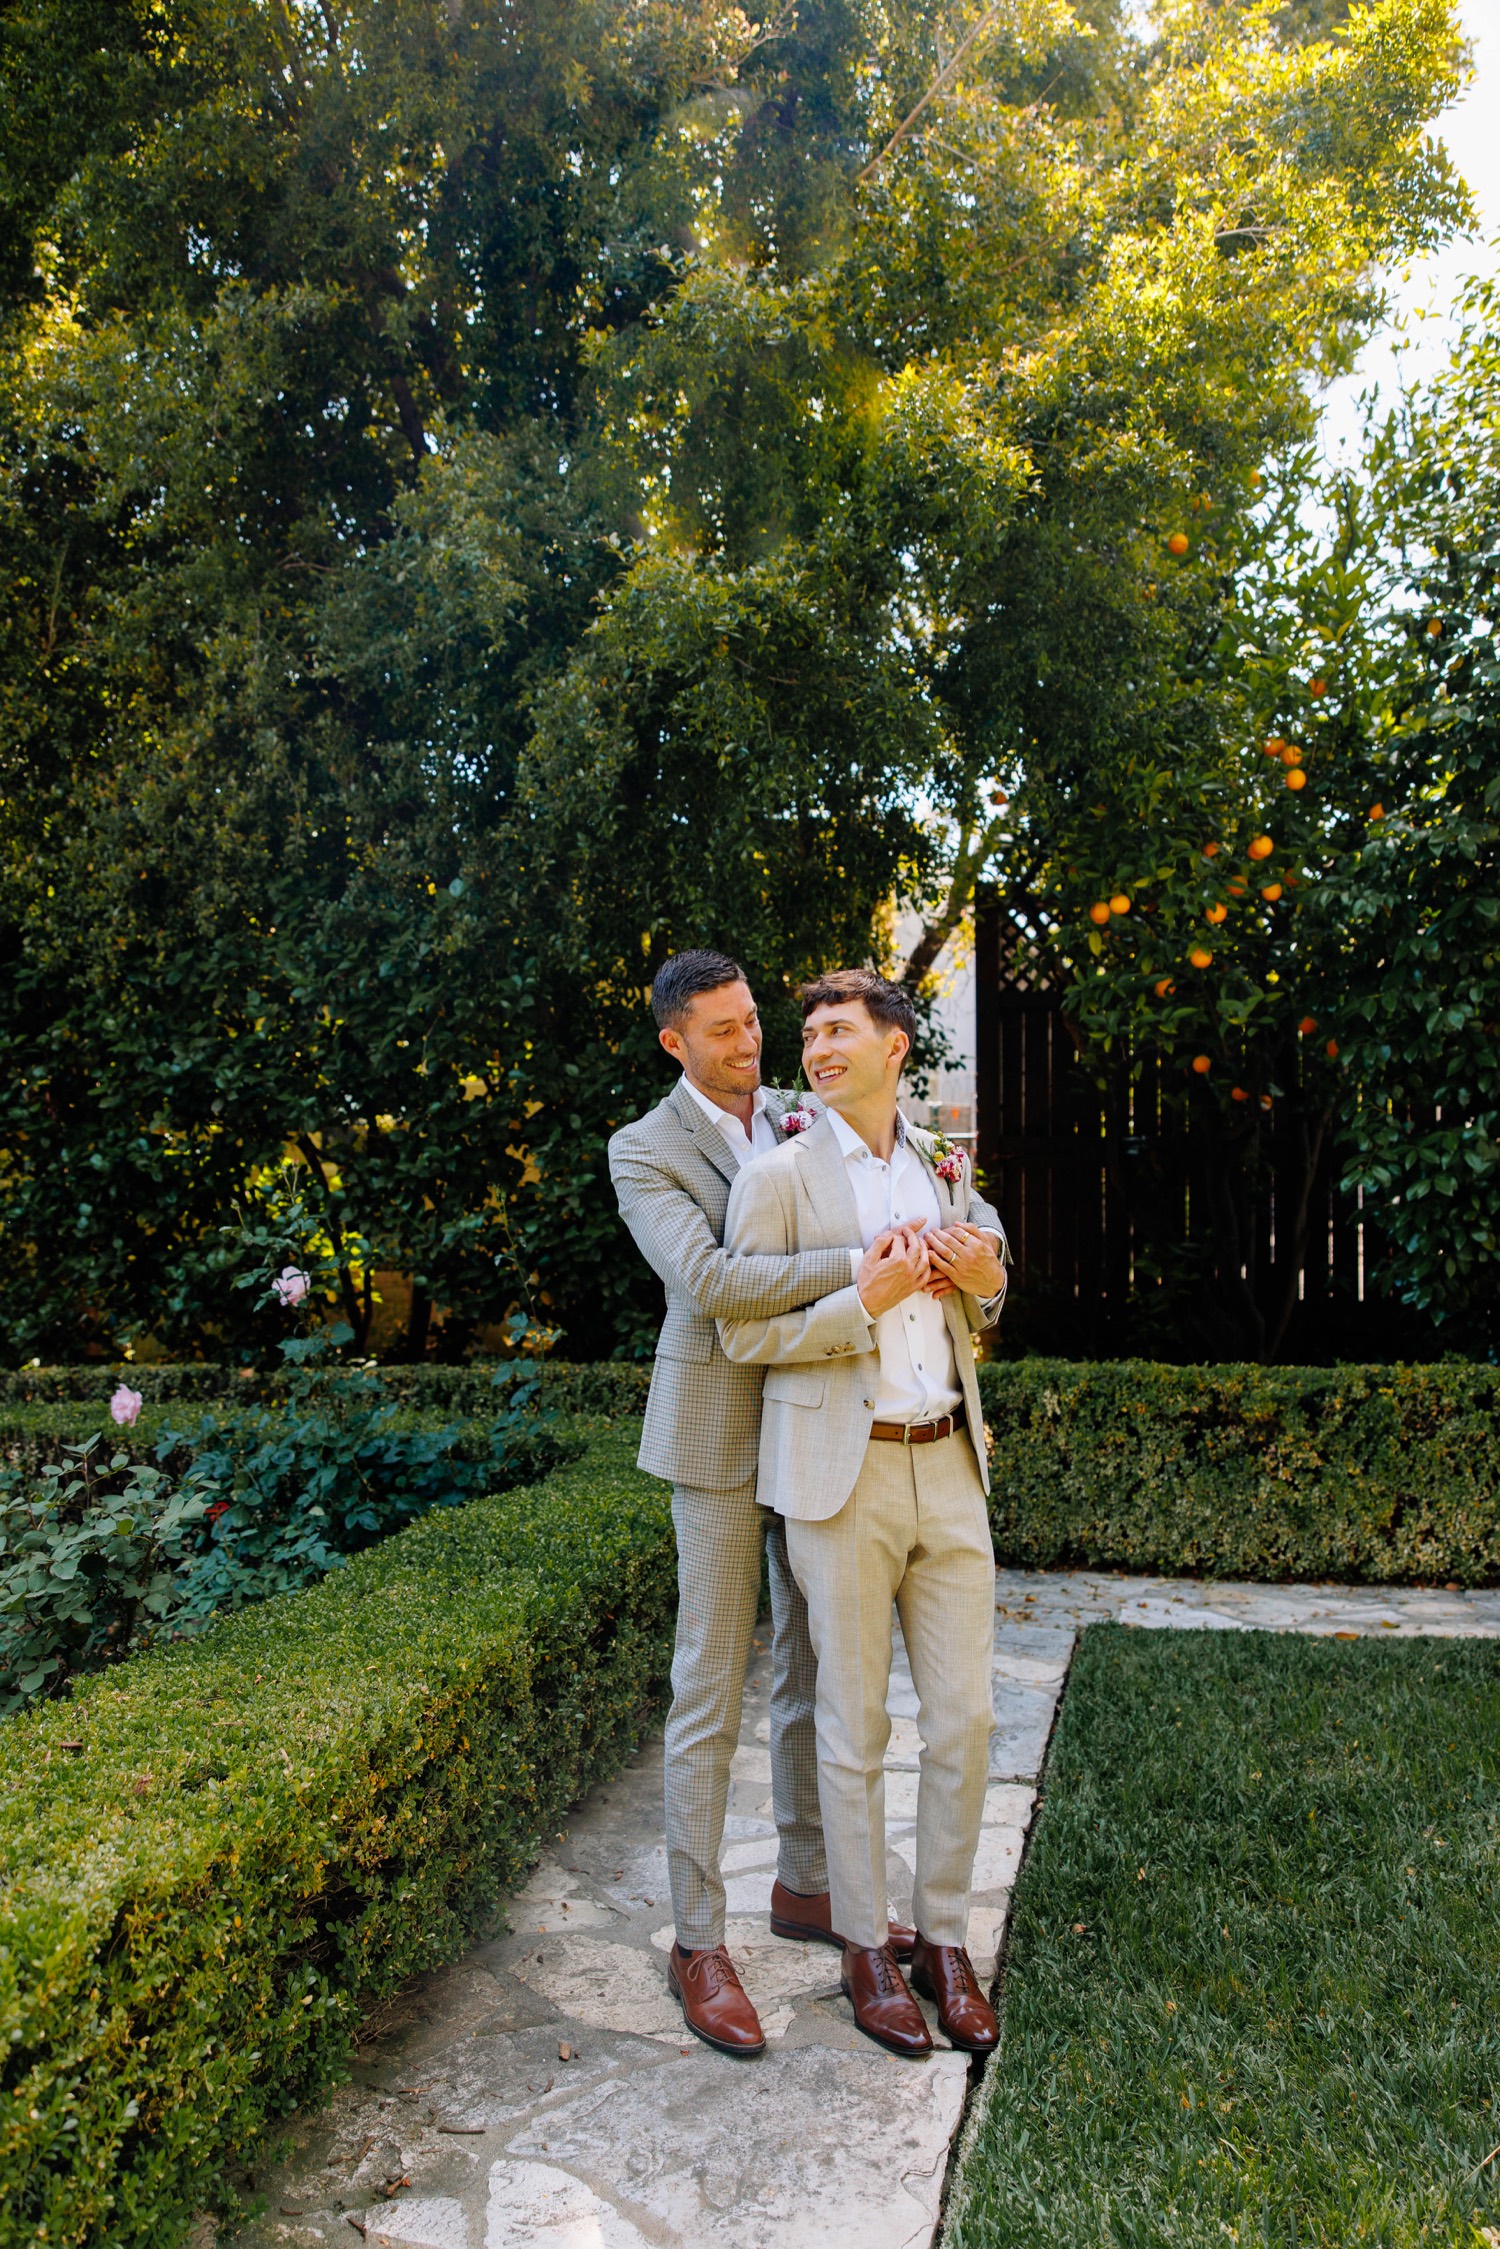 at home wedding photographed by Magaly Barajas, Southern California wedding photographer